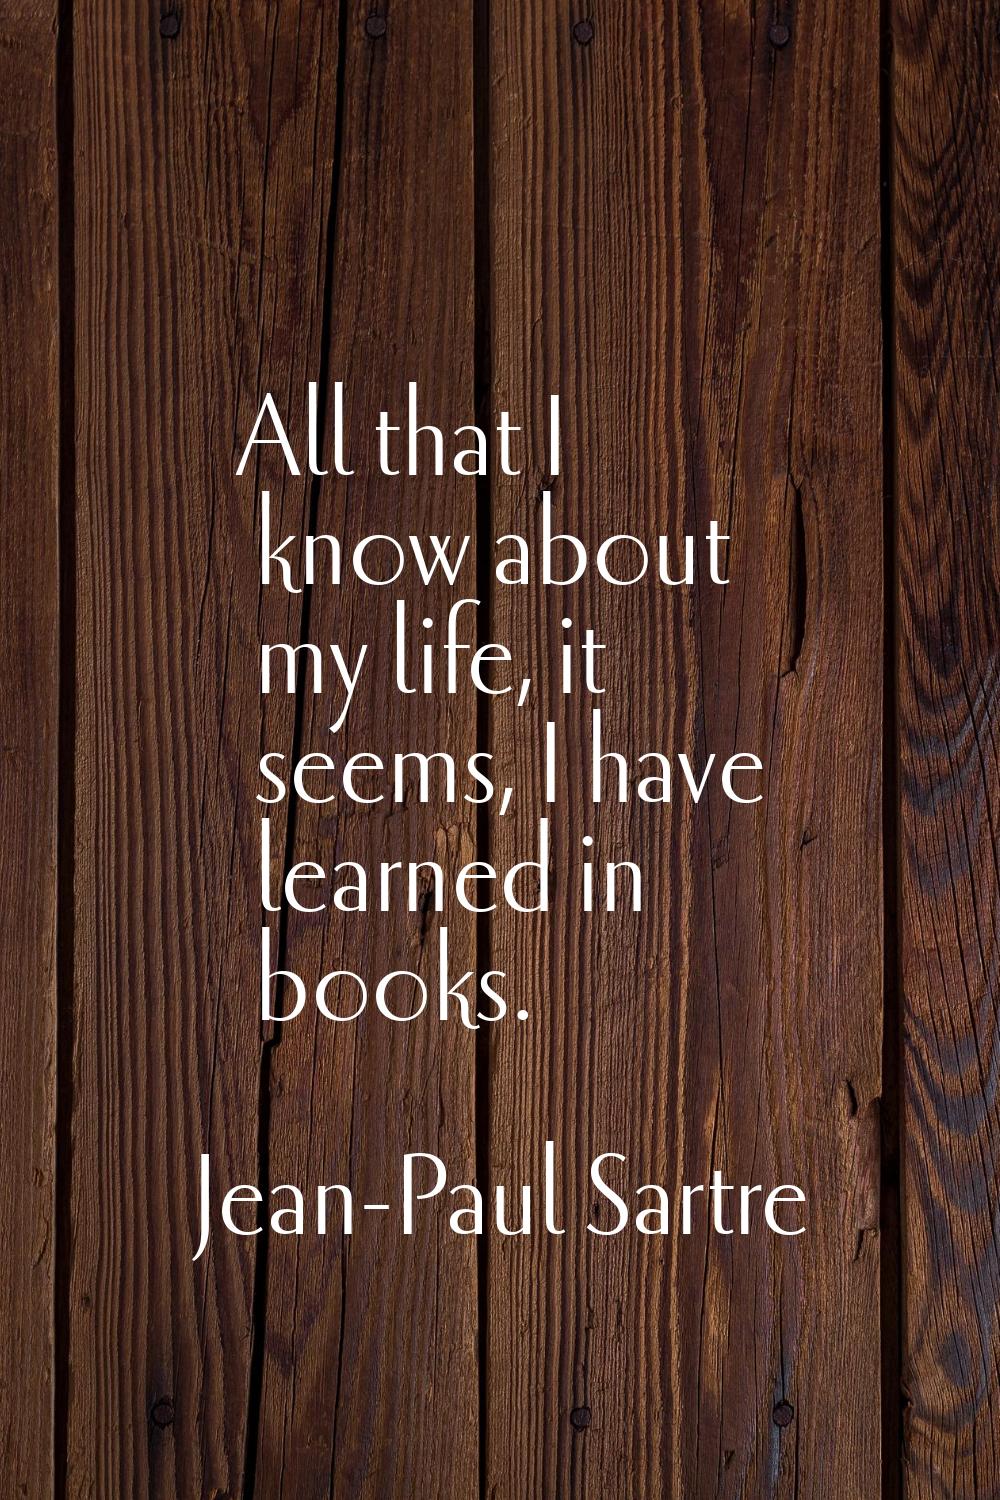 All that I know about my life, it seems, I have learned in books.